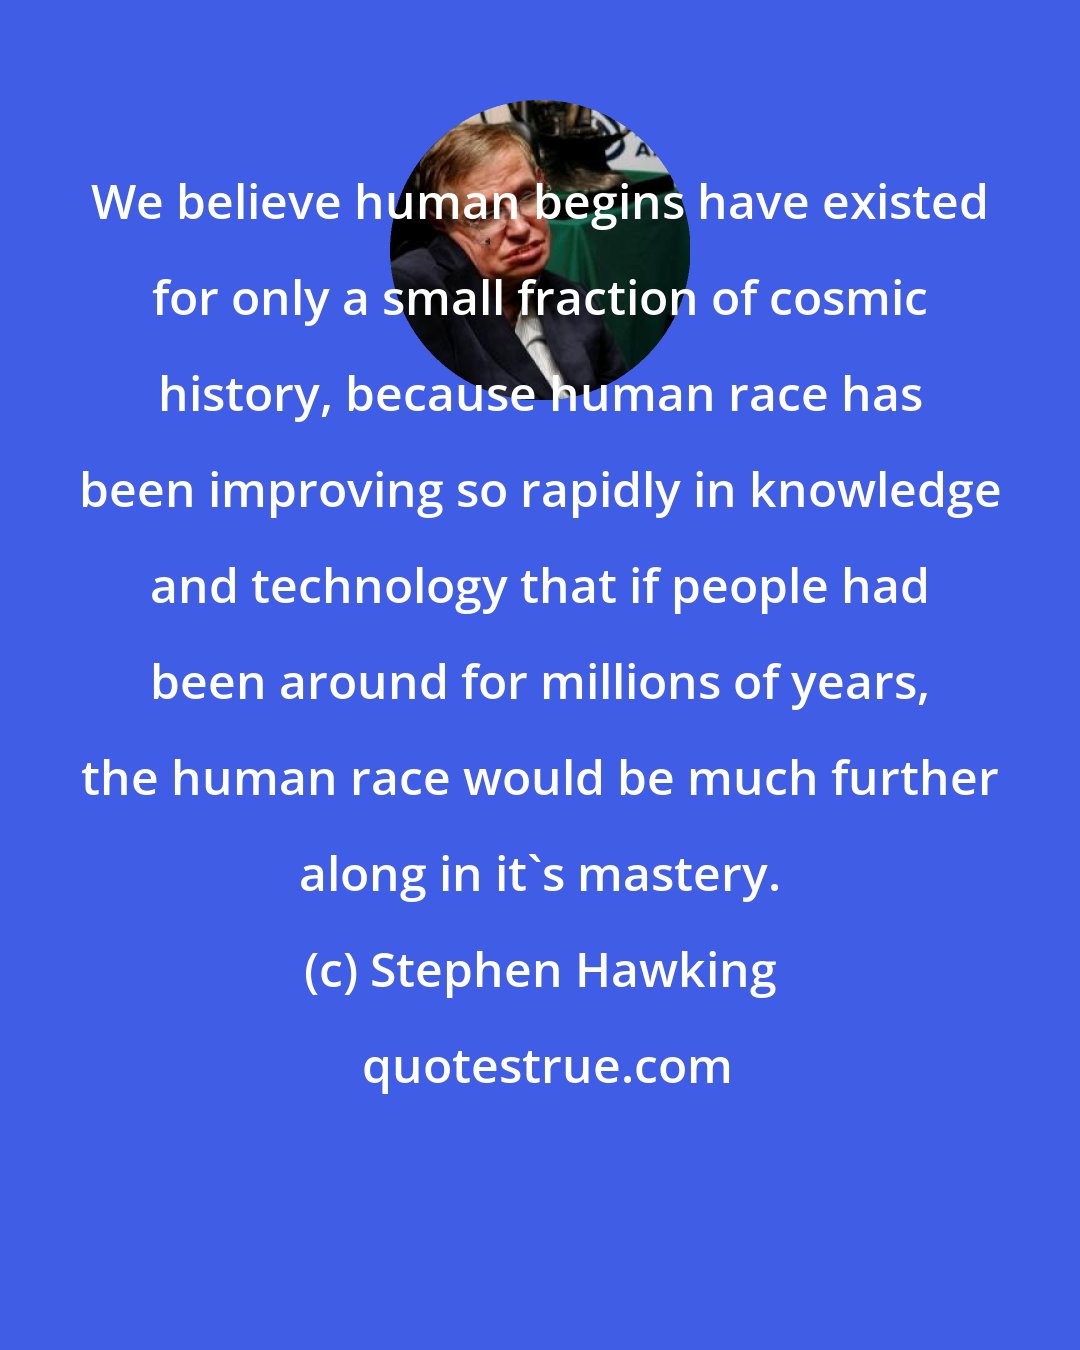 Stephen Hawking: We believe human begins have existed for only a small fraction of cosmic history, because human race has been improving so rapidly in knowledge and technology that if people had been around for millions of years, the human race would be much further along in it's mastery.